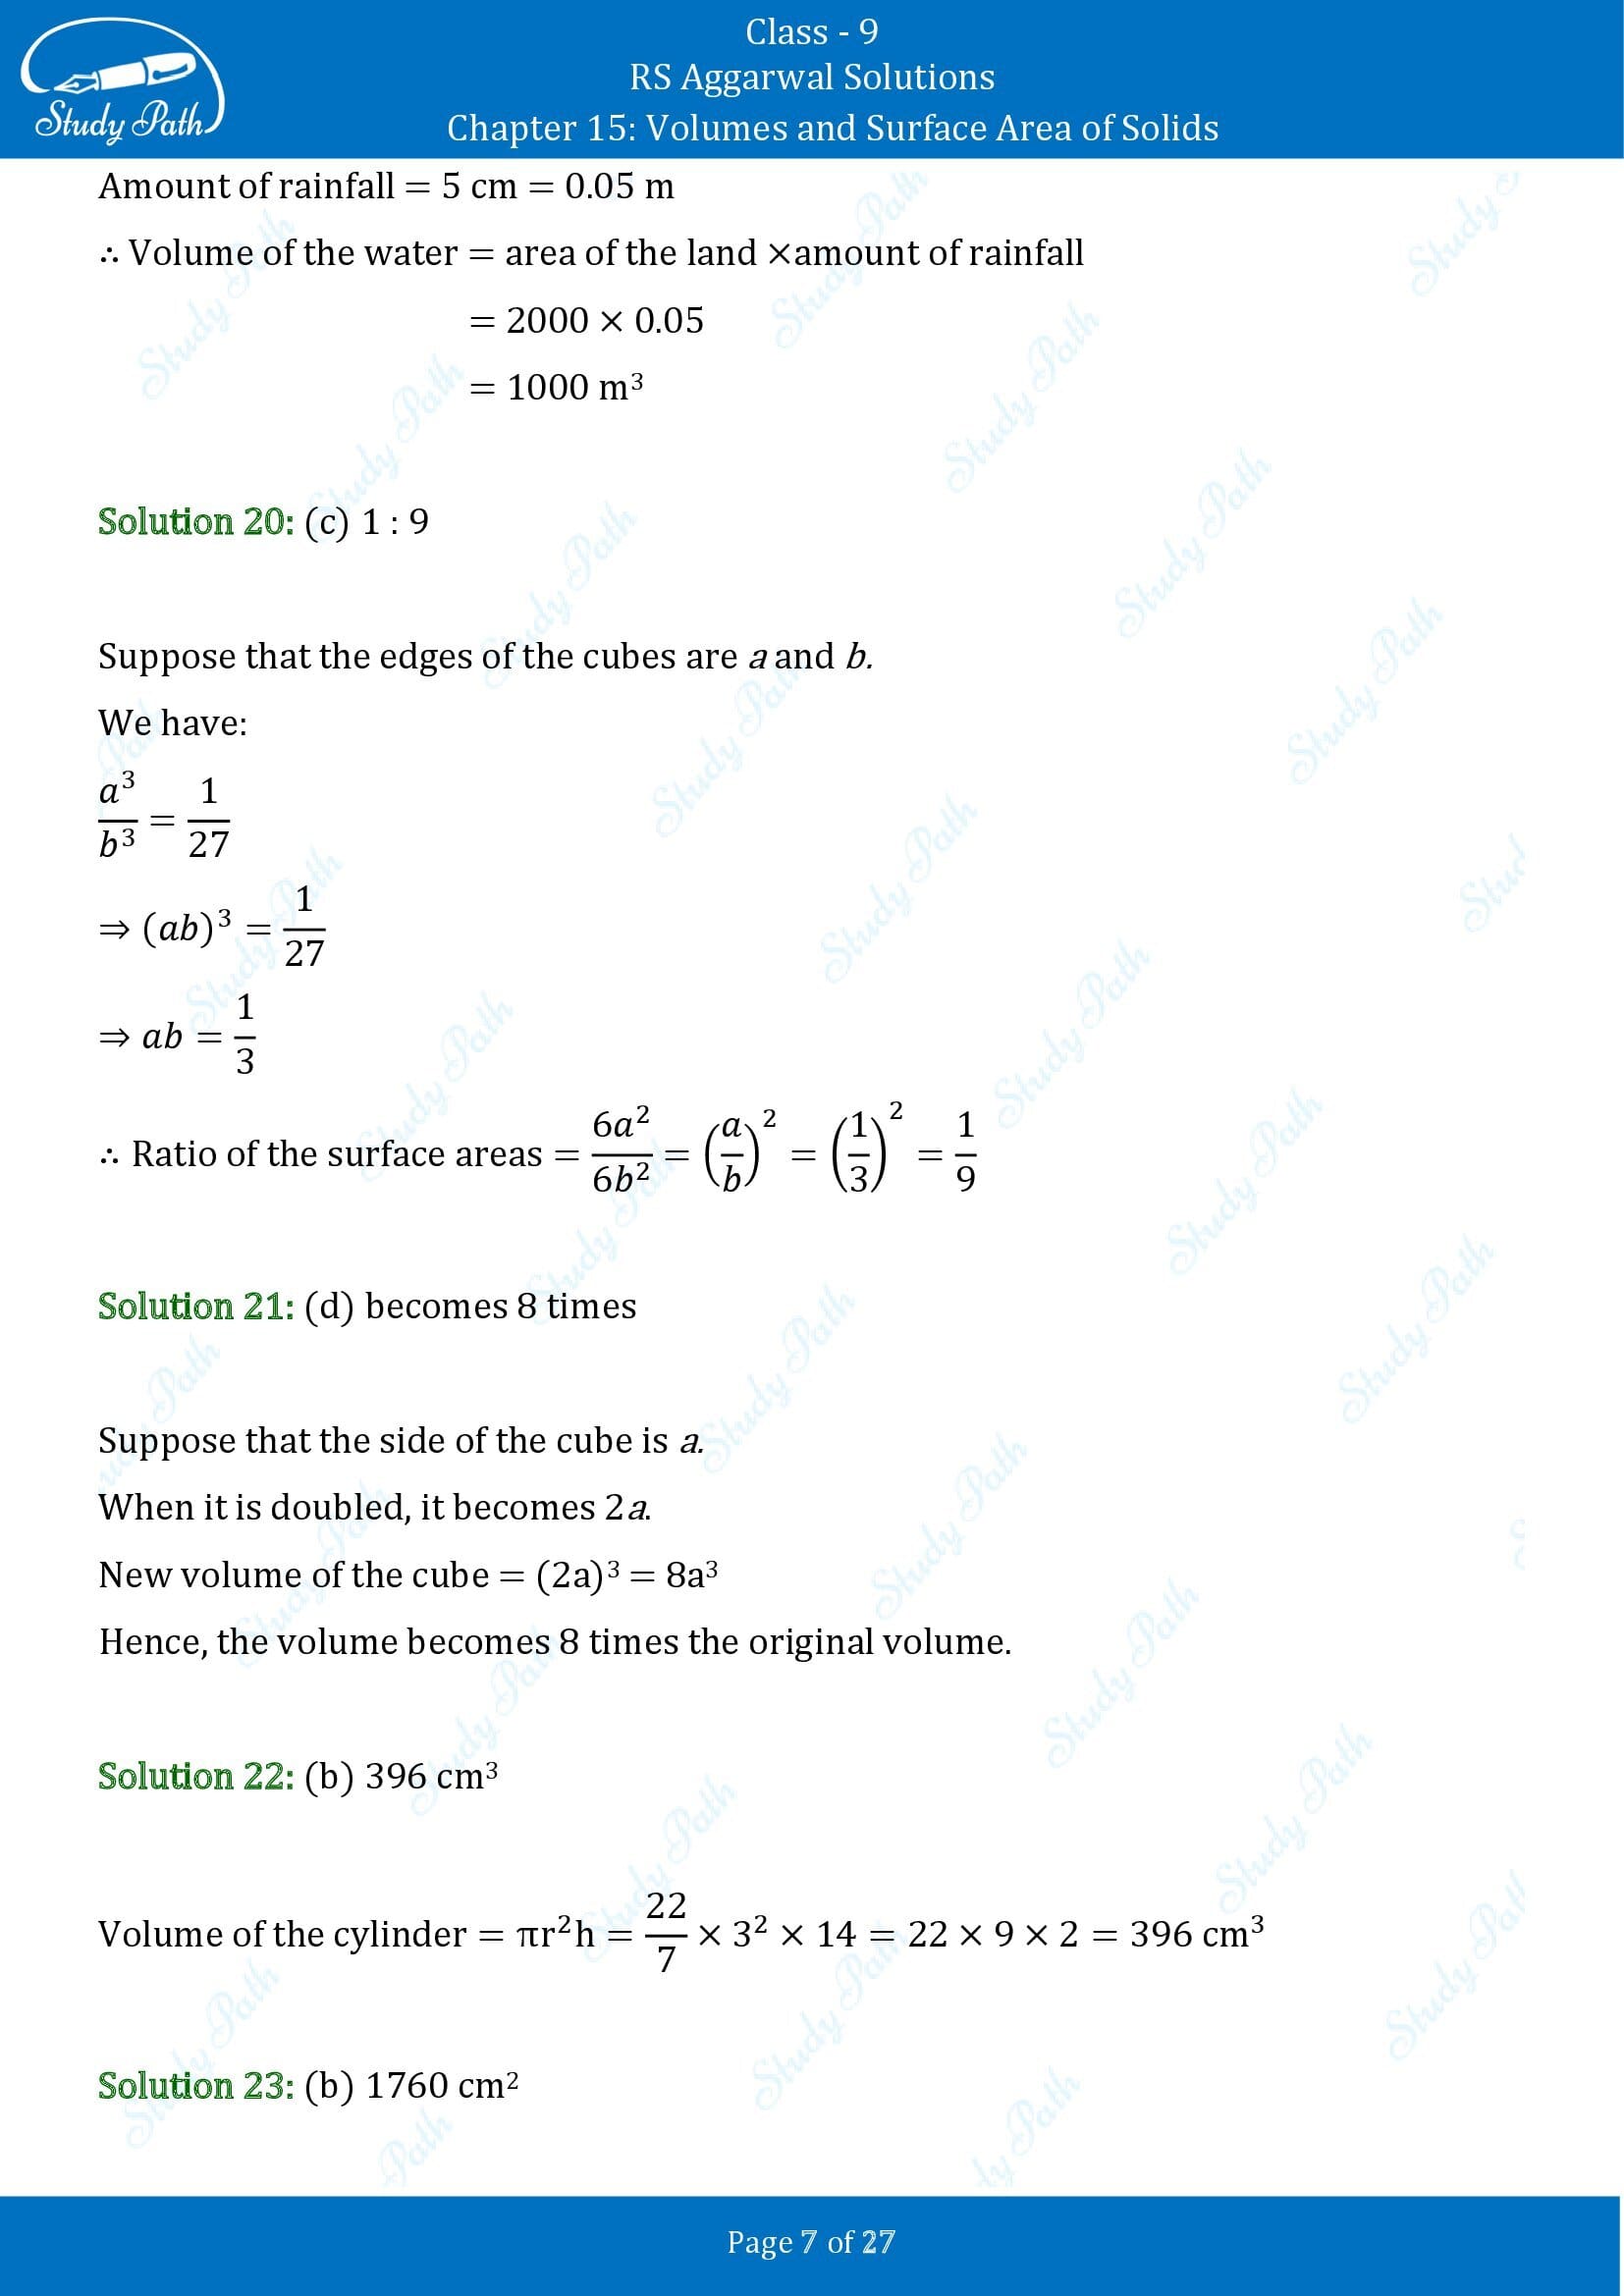 RS Aggarwal Solutions Class 9 Chapter 15 Volumes and Surface Area of Solids Multiple Choice Questions MCQs 00007